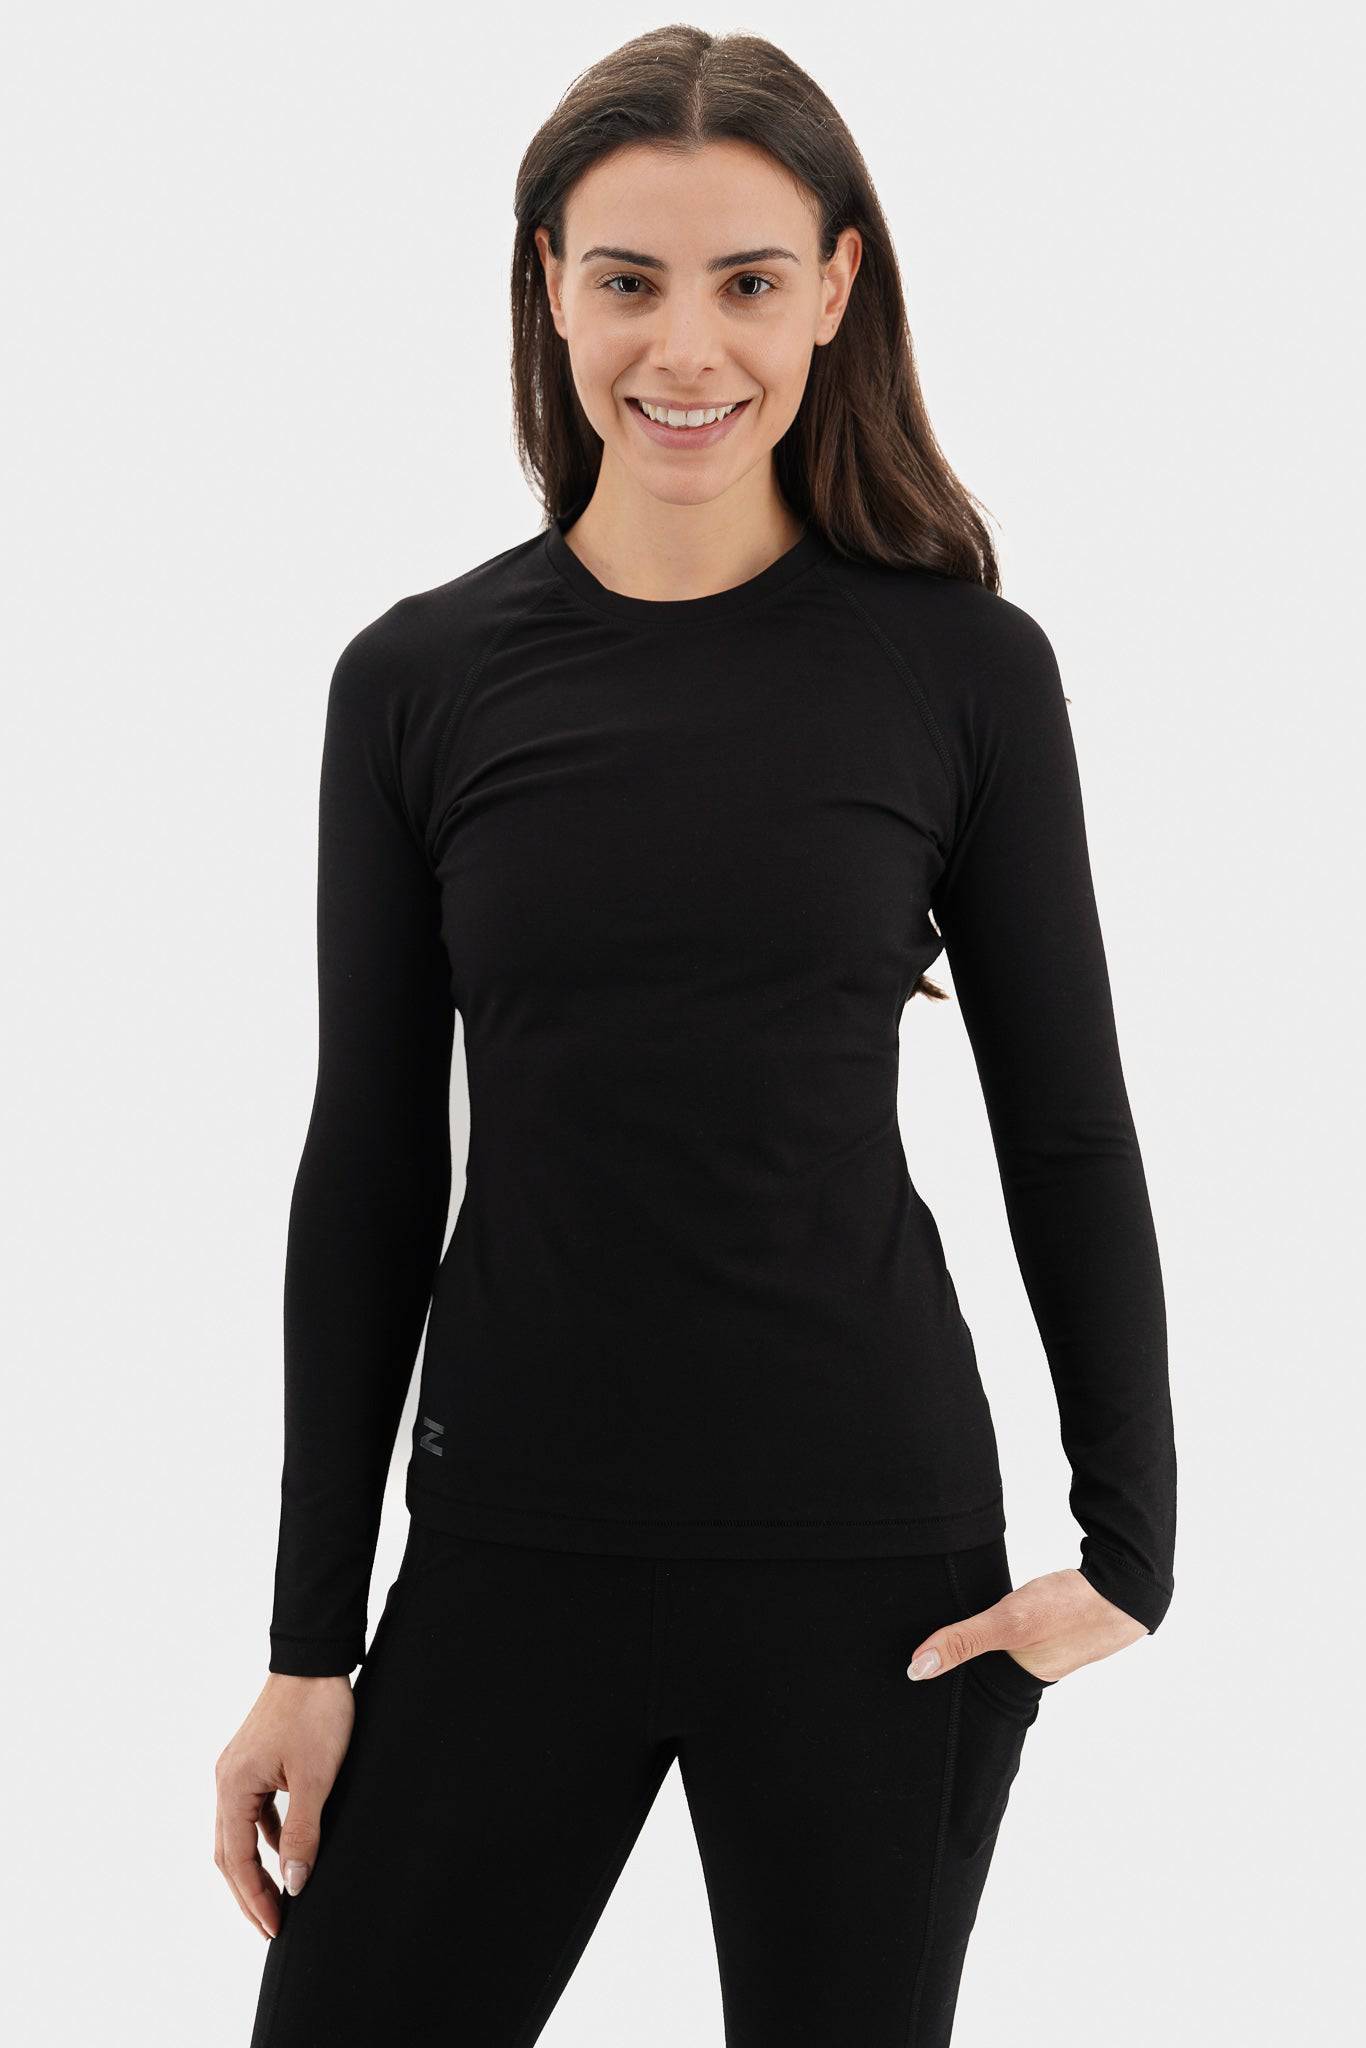 Women's Mid Weight Compression Long Sleeve SALE